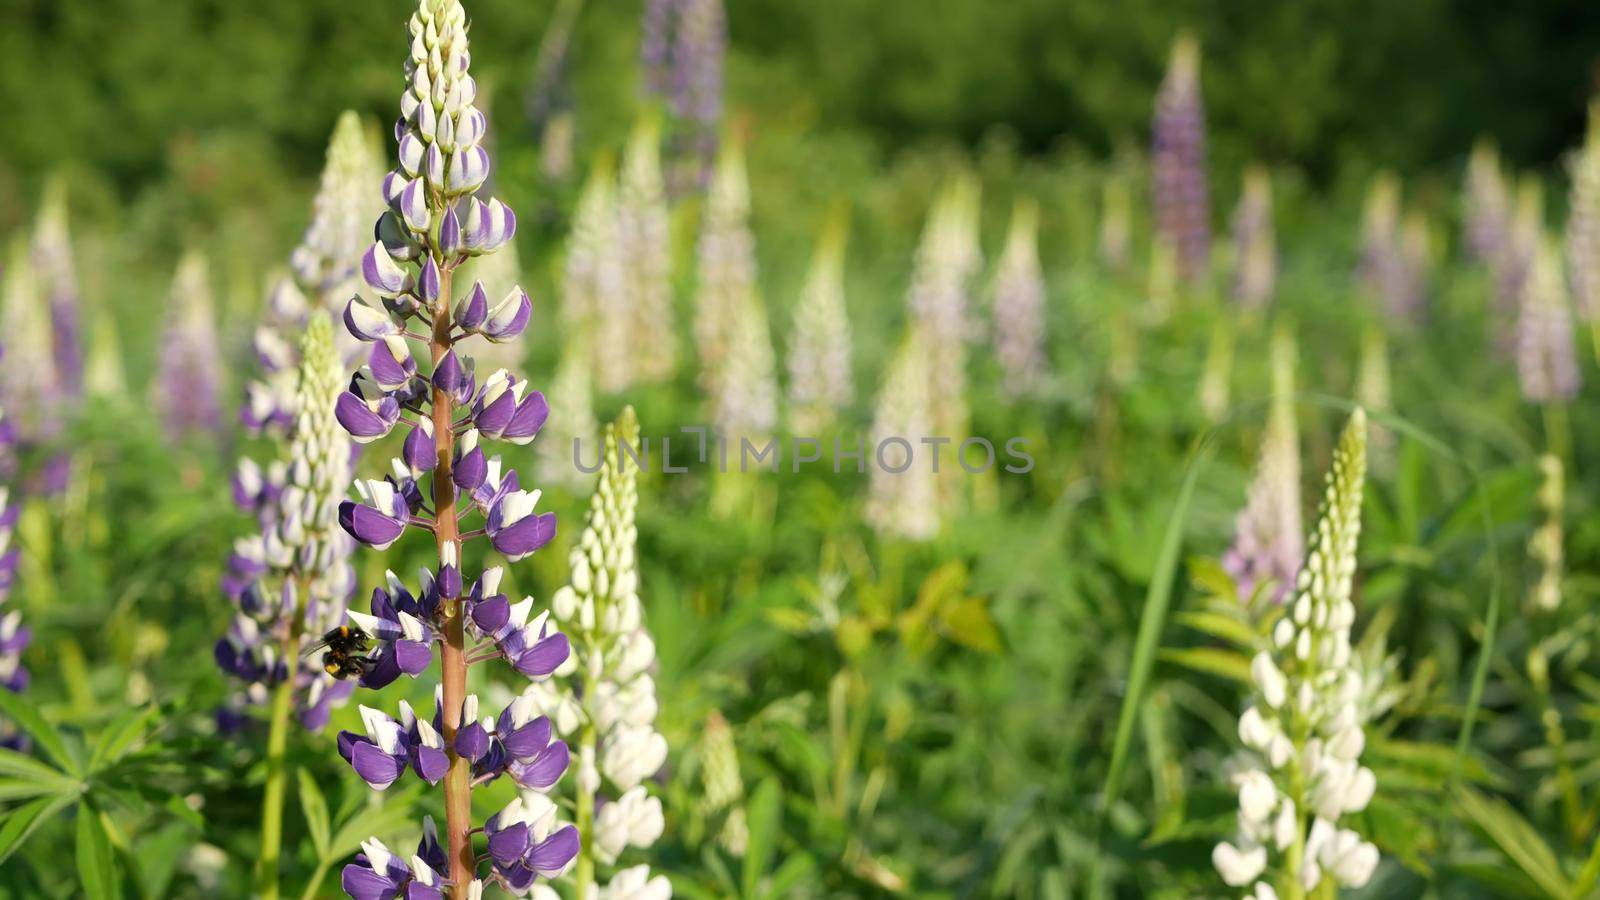 Honey bee pollinating violet lupin wildflowers on meadow. Bumblebee, honeybee or apis flying by purple lupine flowers on lawn, field or glade. Insect and lilac lupinus bloom or blossom on spring lea.